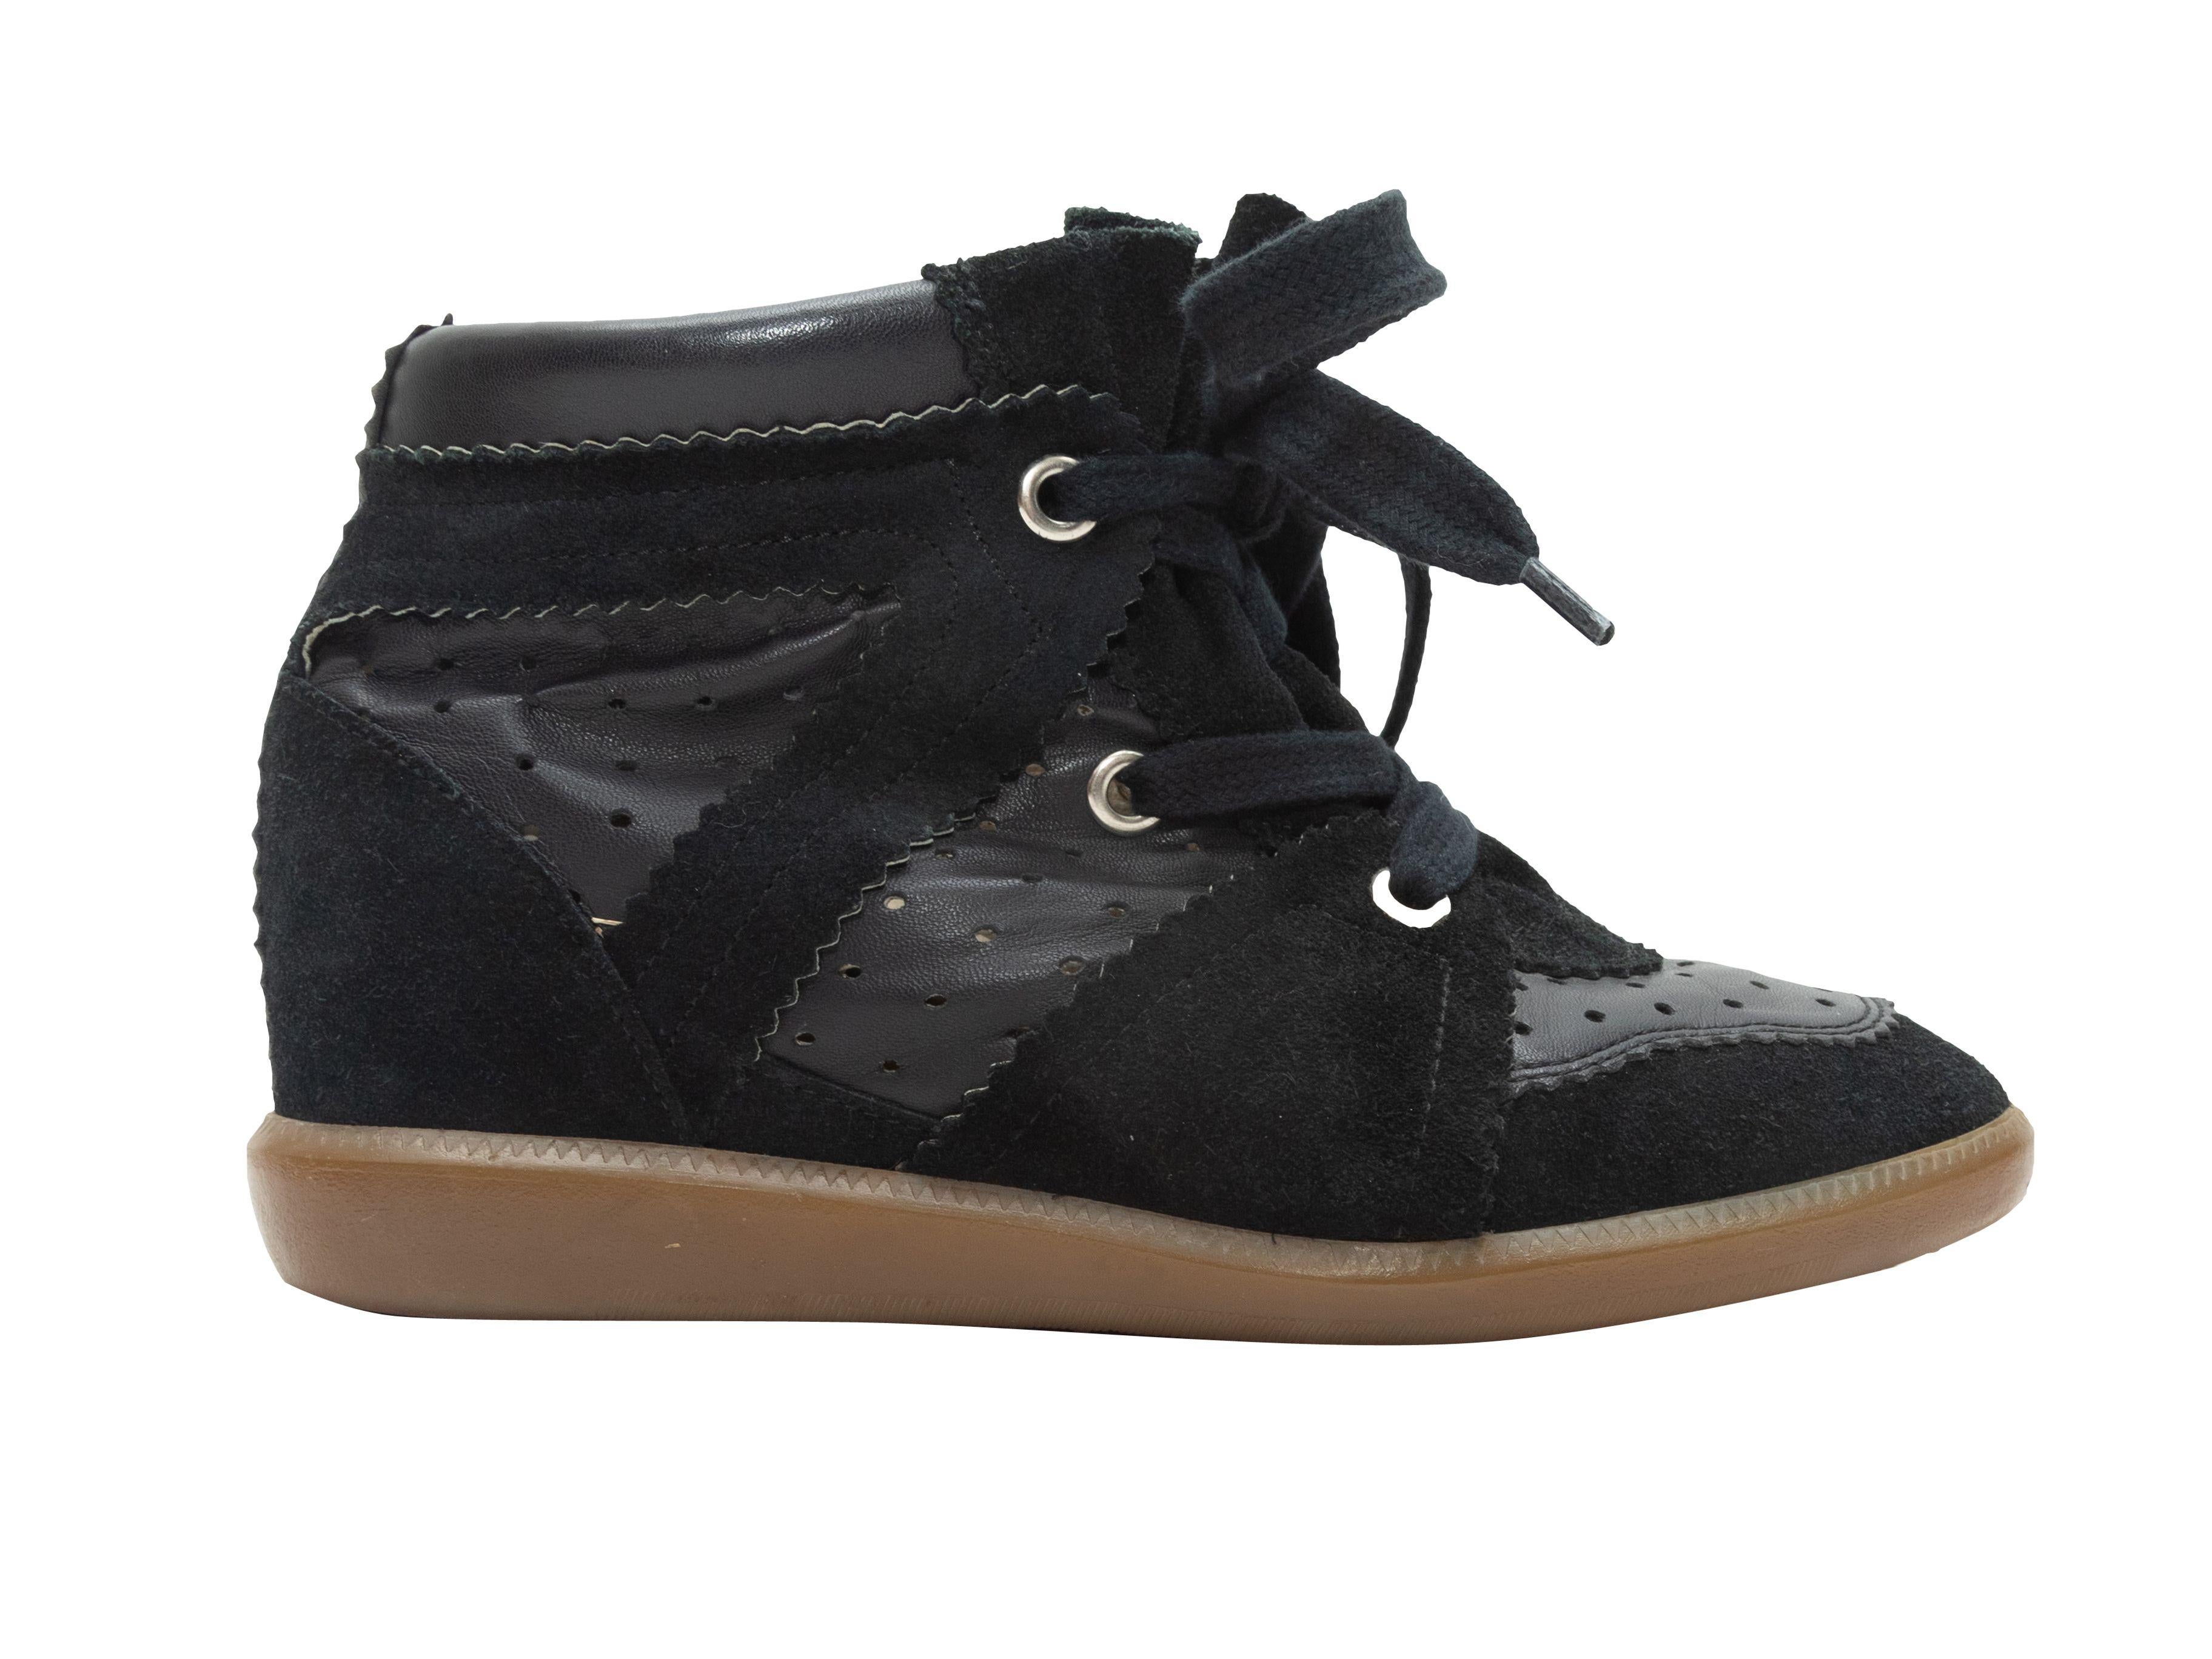 Isabel Marant Black Suede & Leather Wedge Sneakers For Sale 1